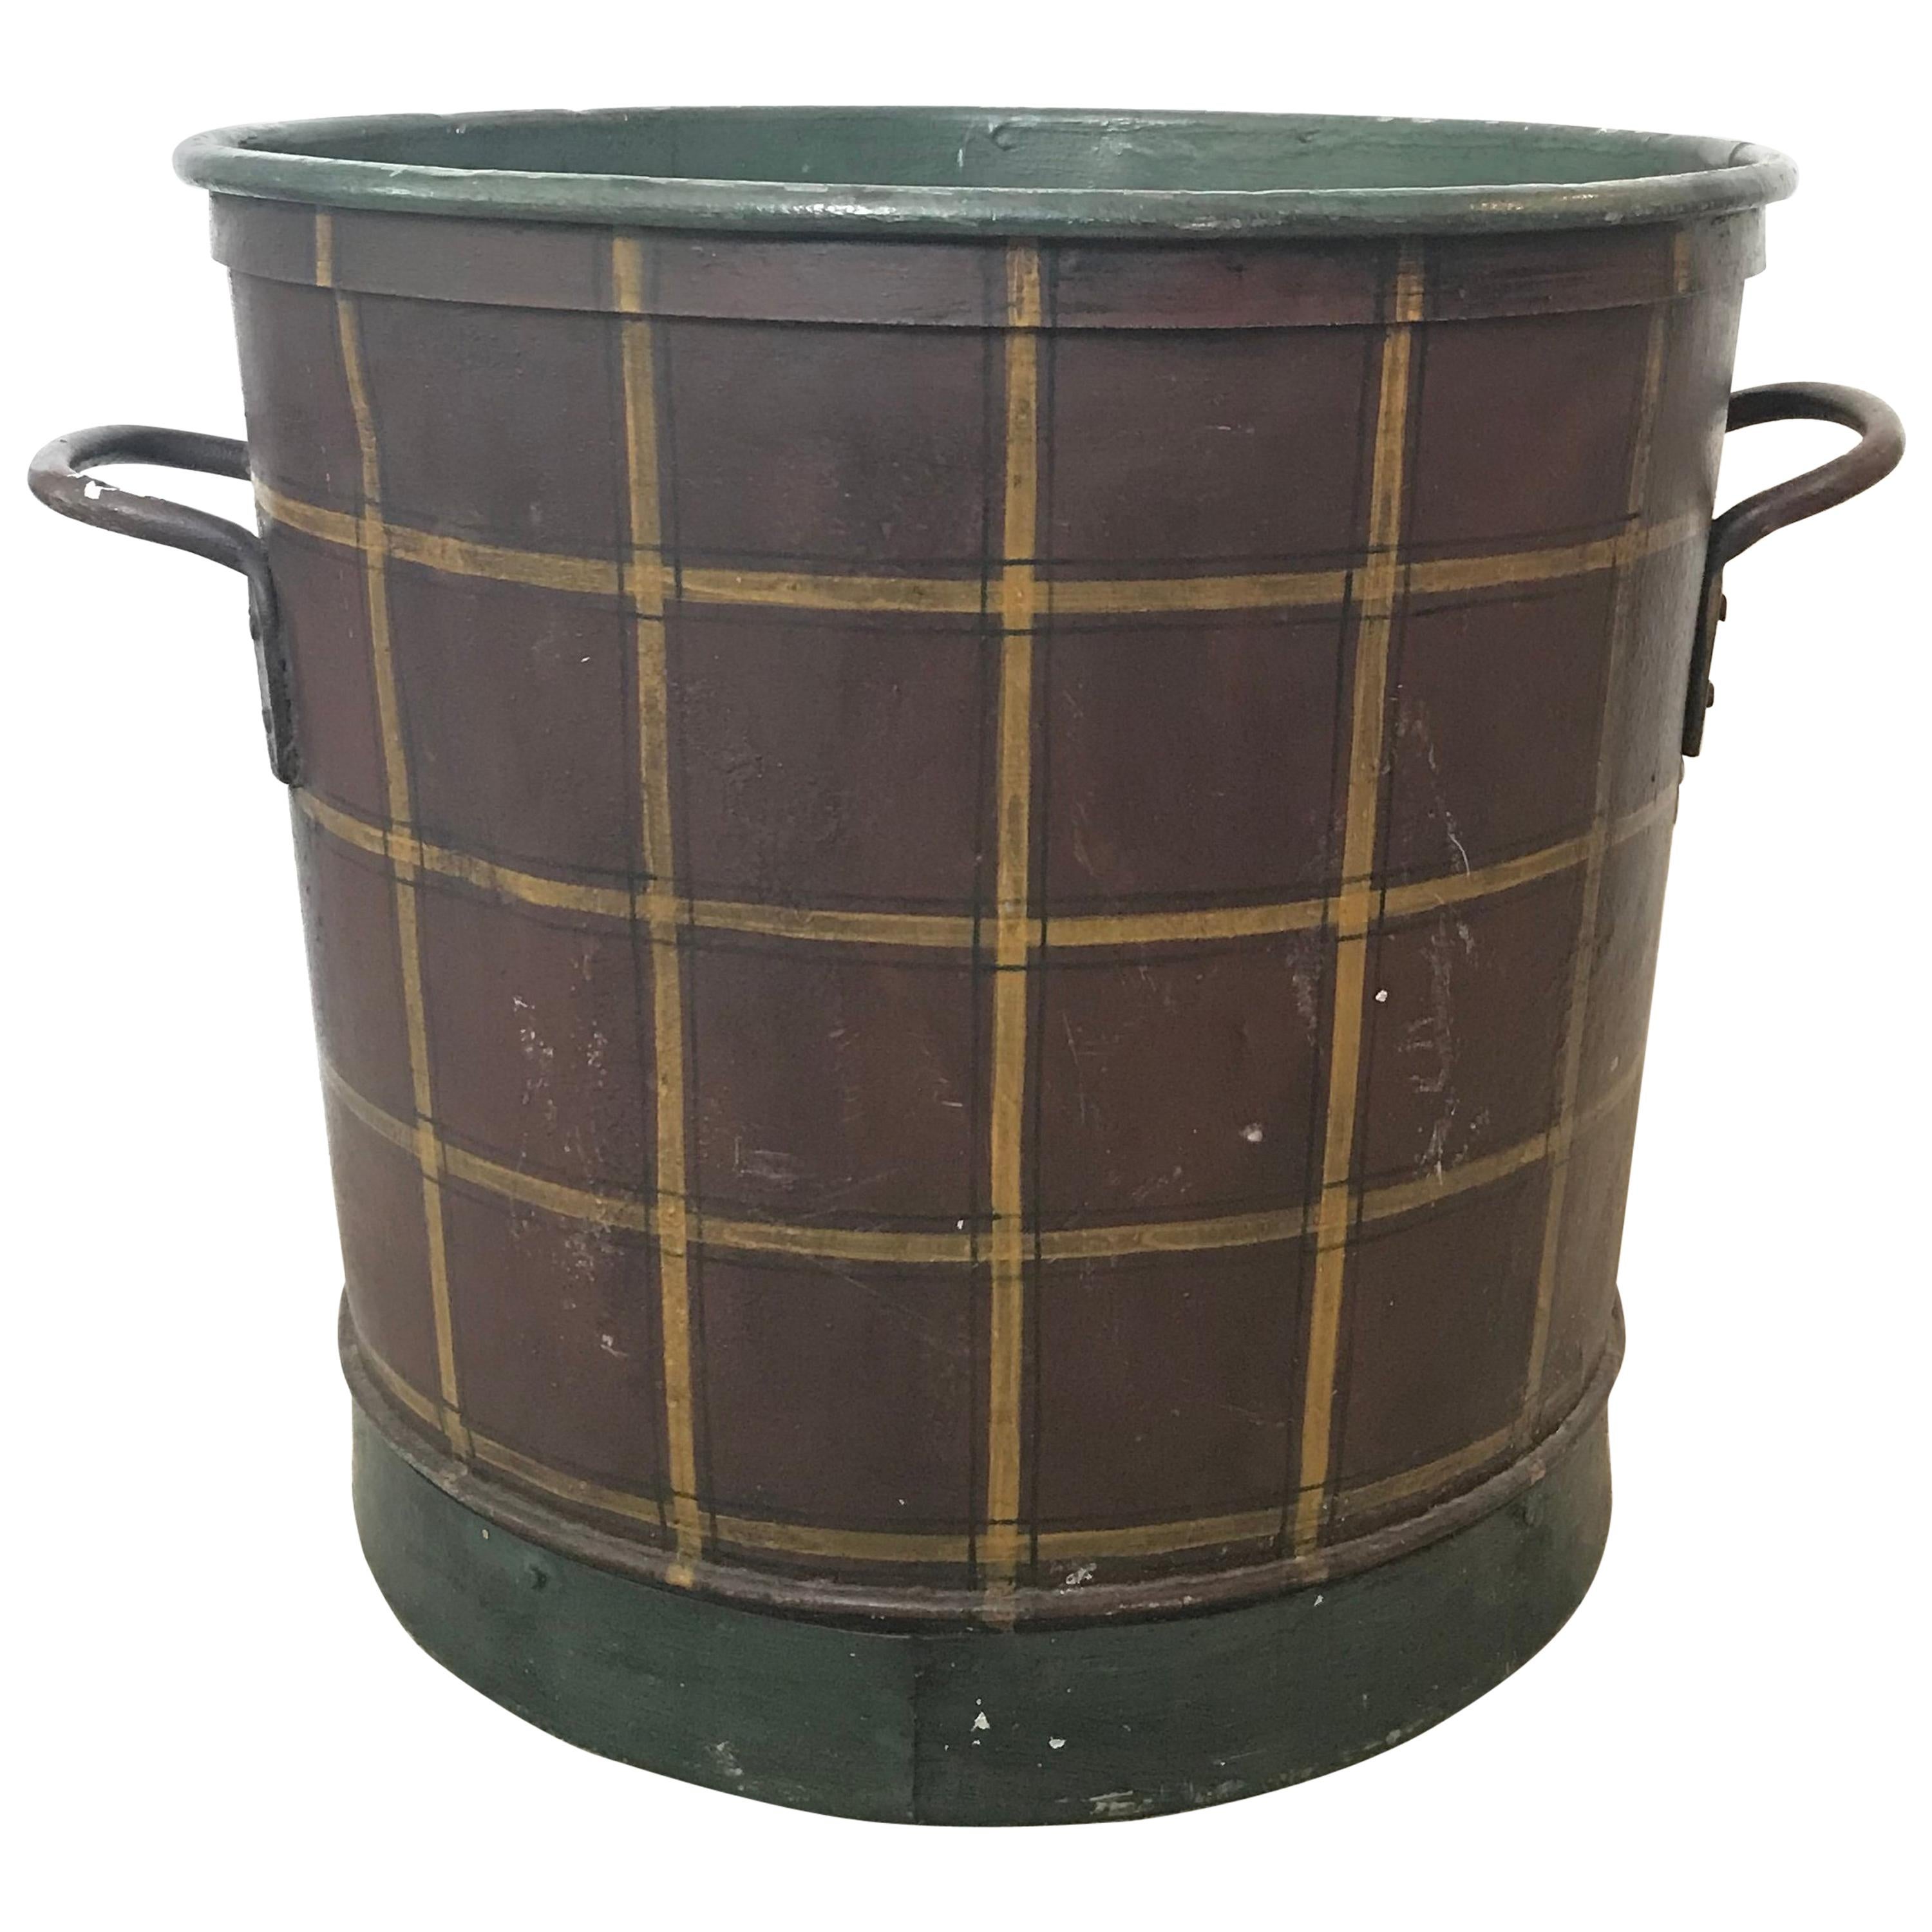 Hand-Painted English Bucket for Logs or Plants